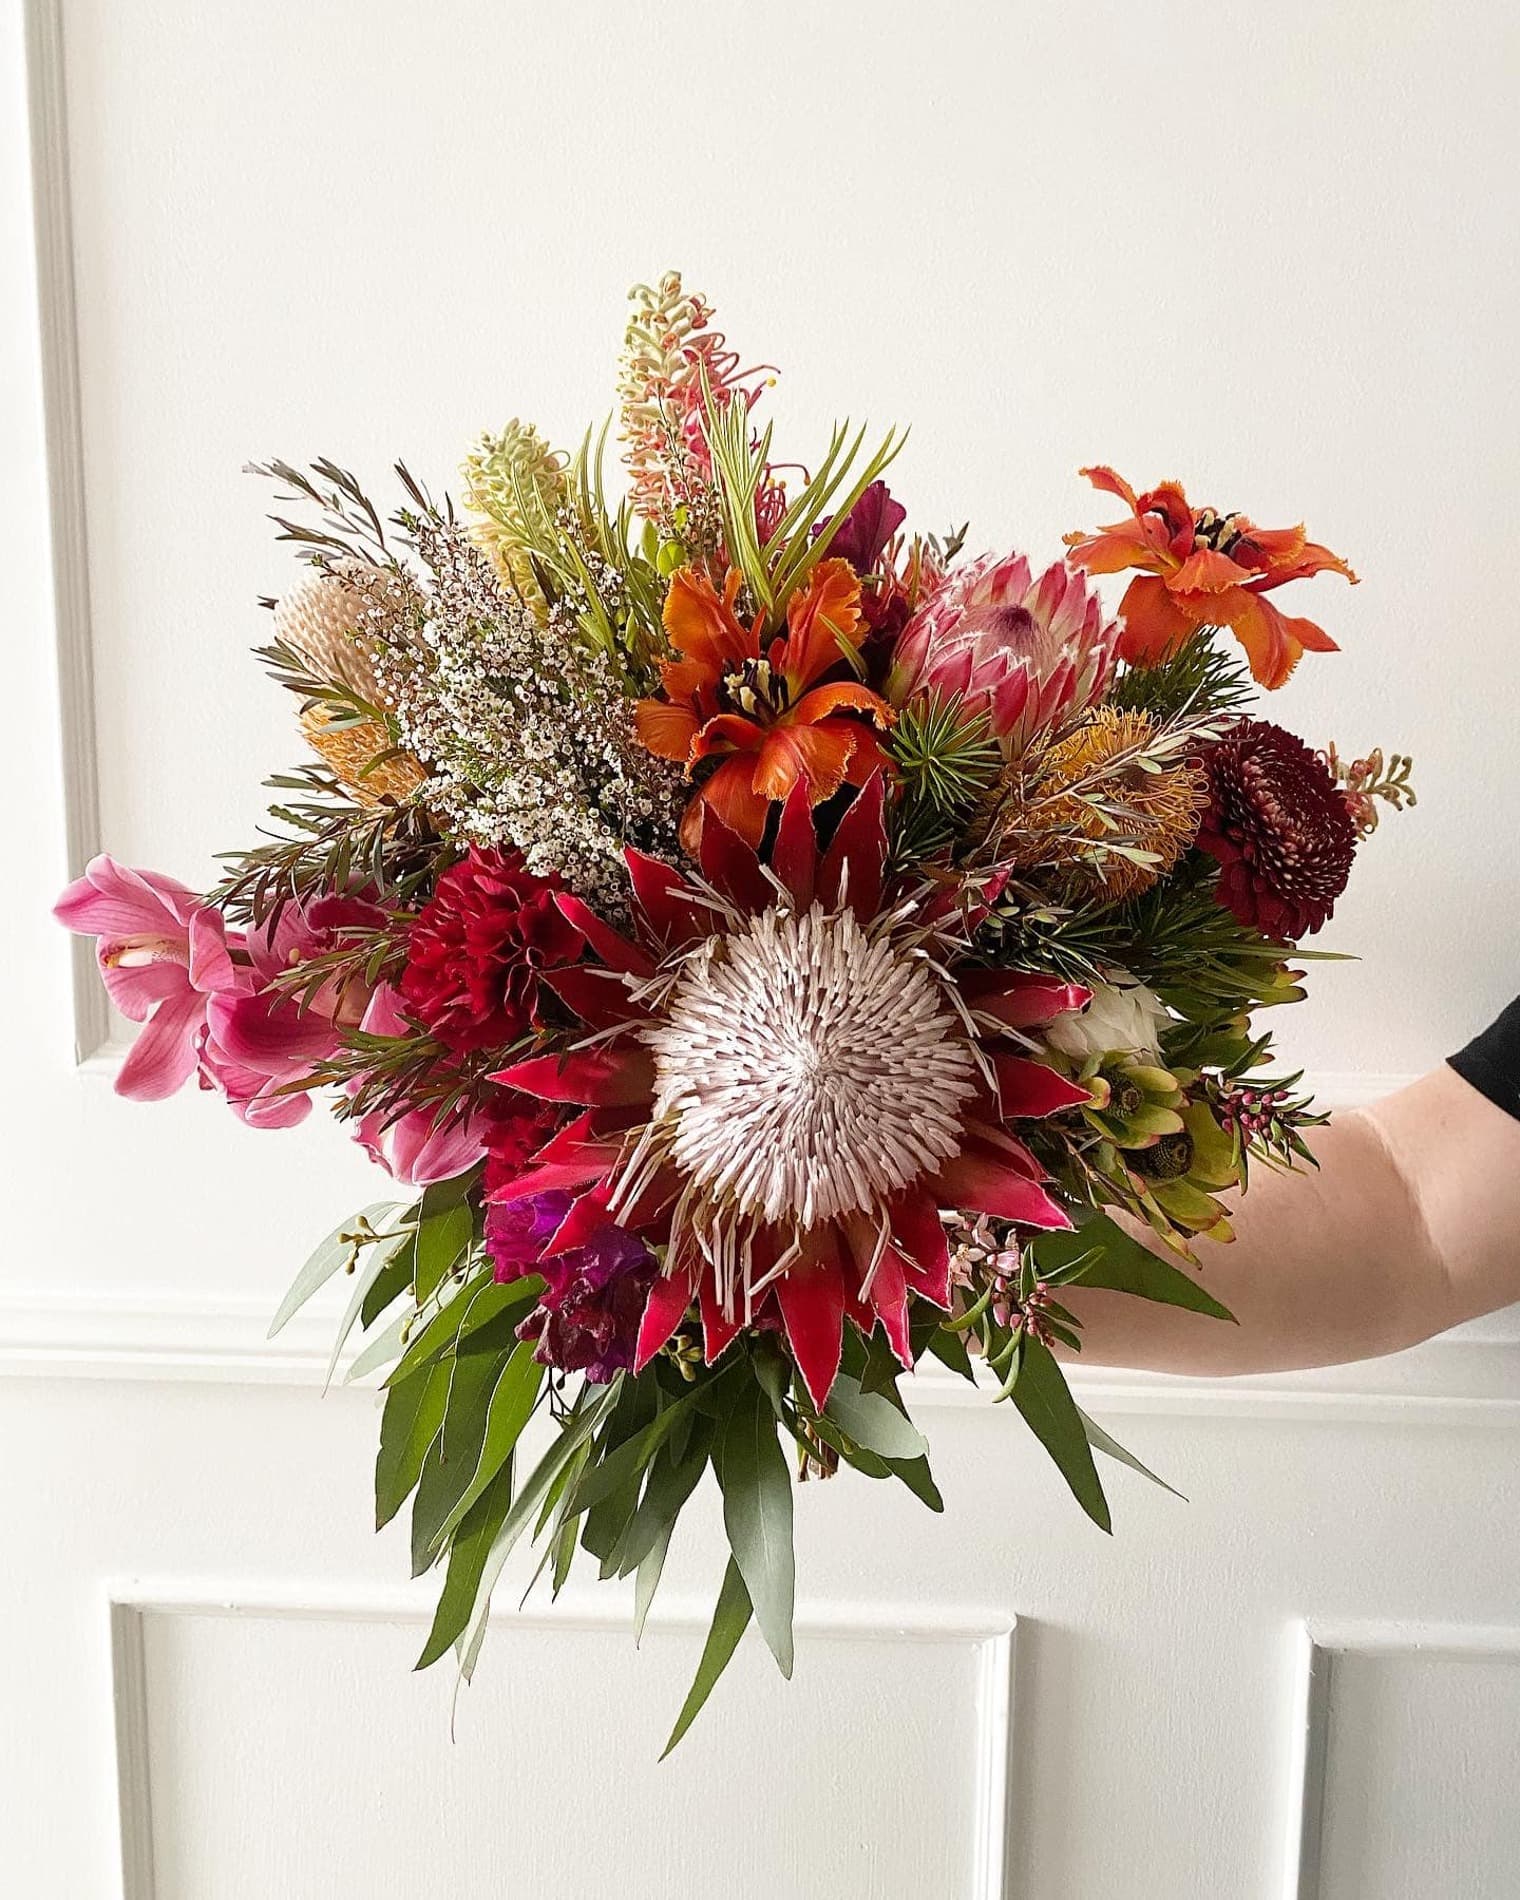 Florist in Muswellbrook - Hello Fleur - Polly & Co - Delivery to Muswellbrook, Denman, Scone